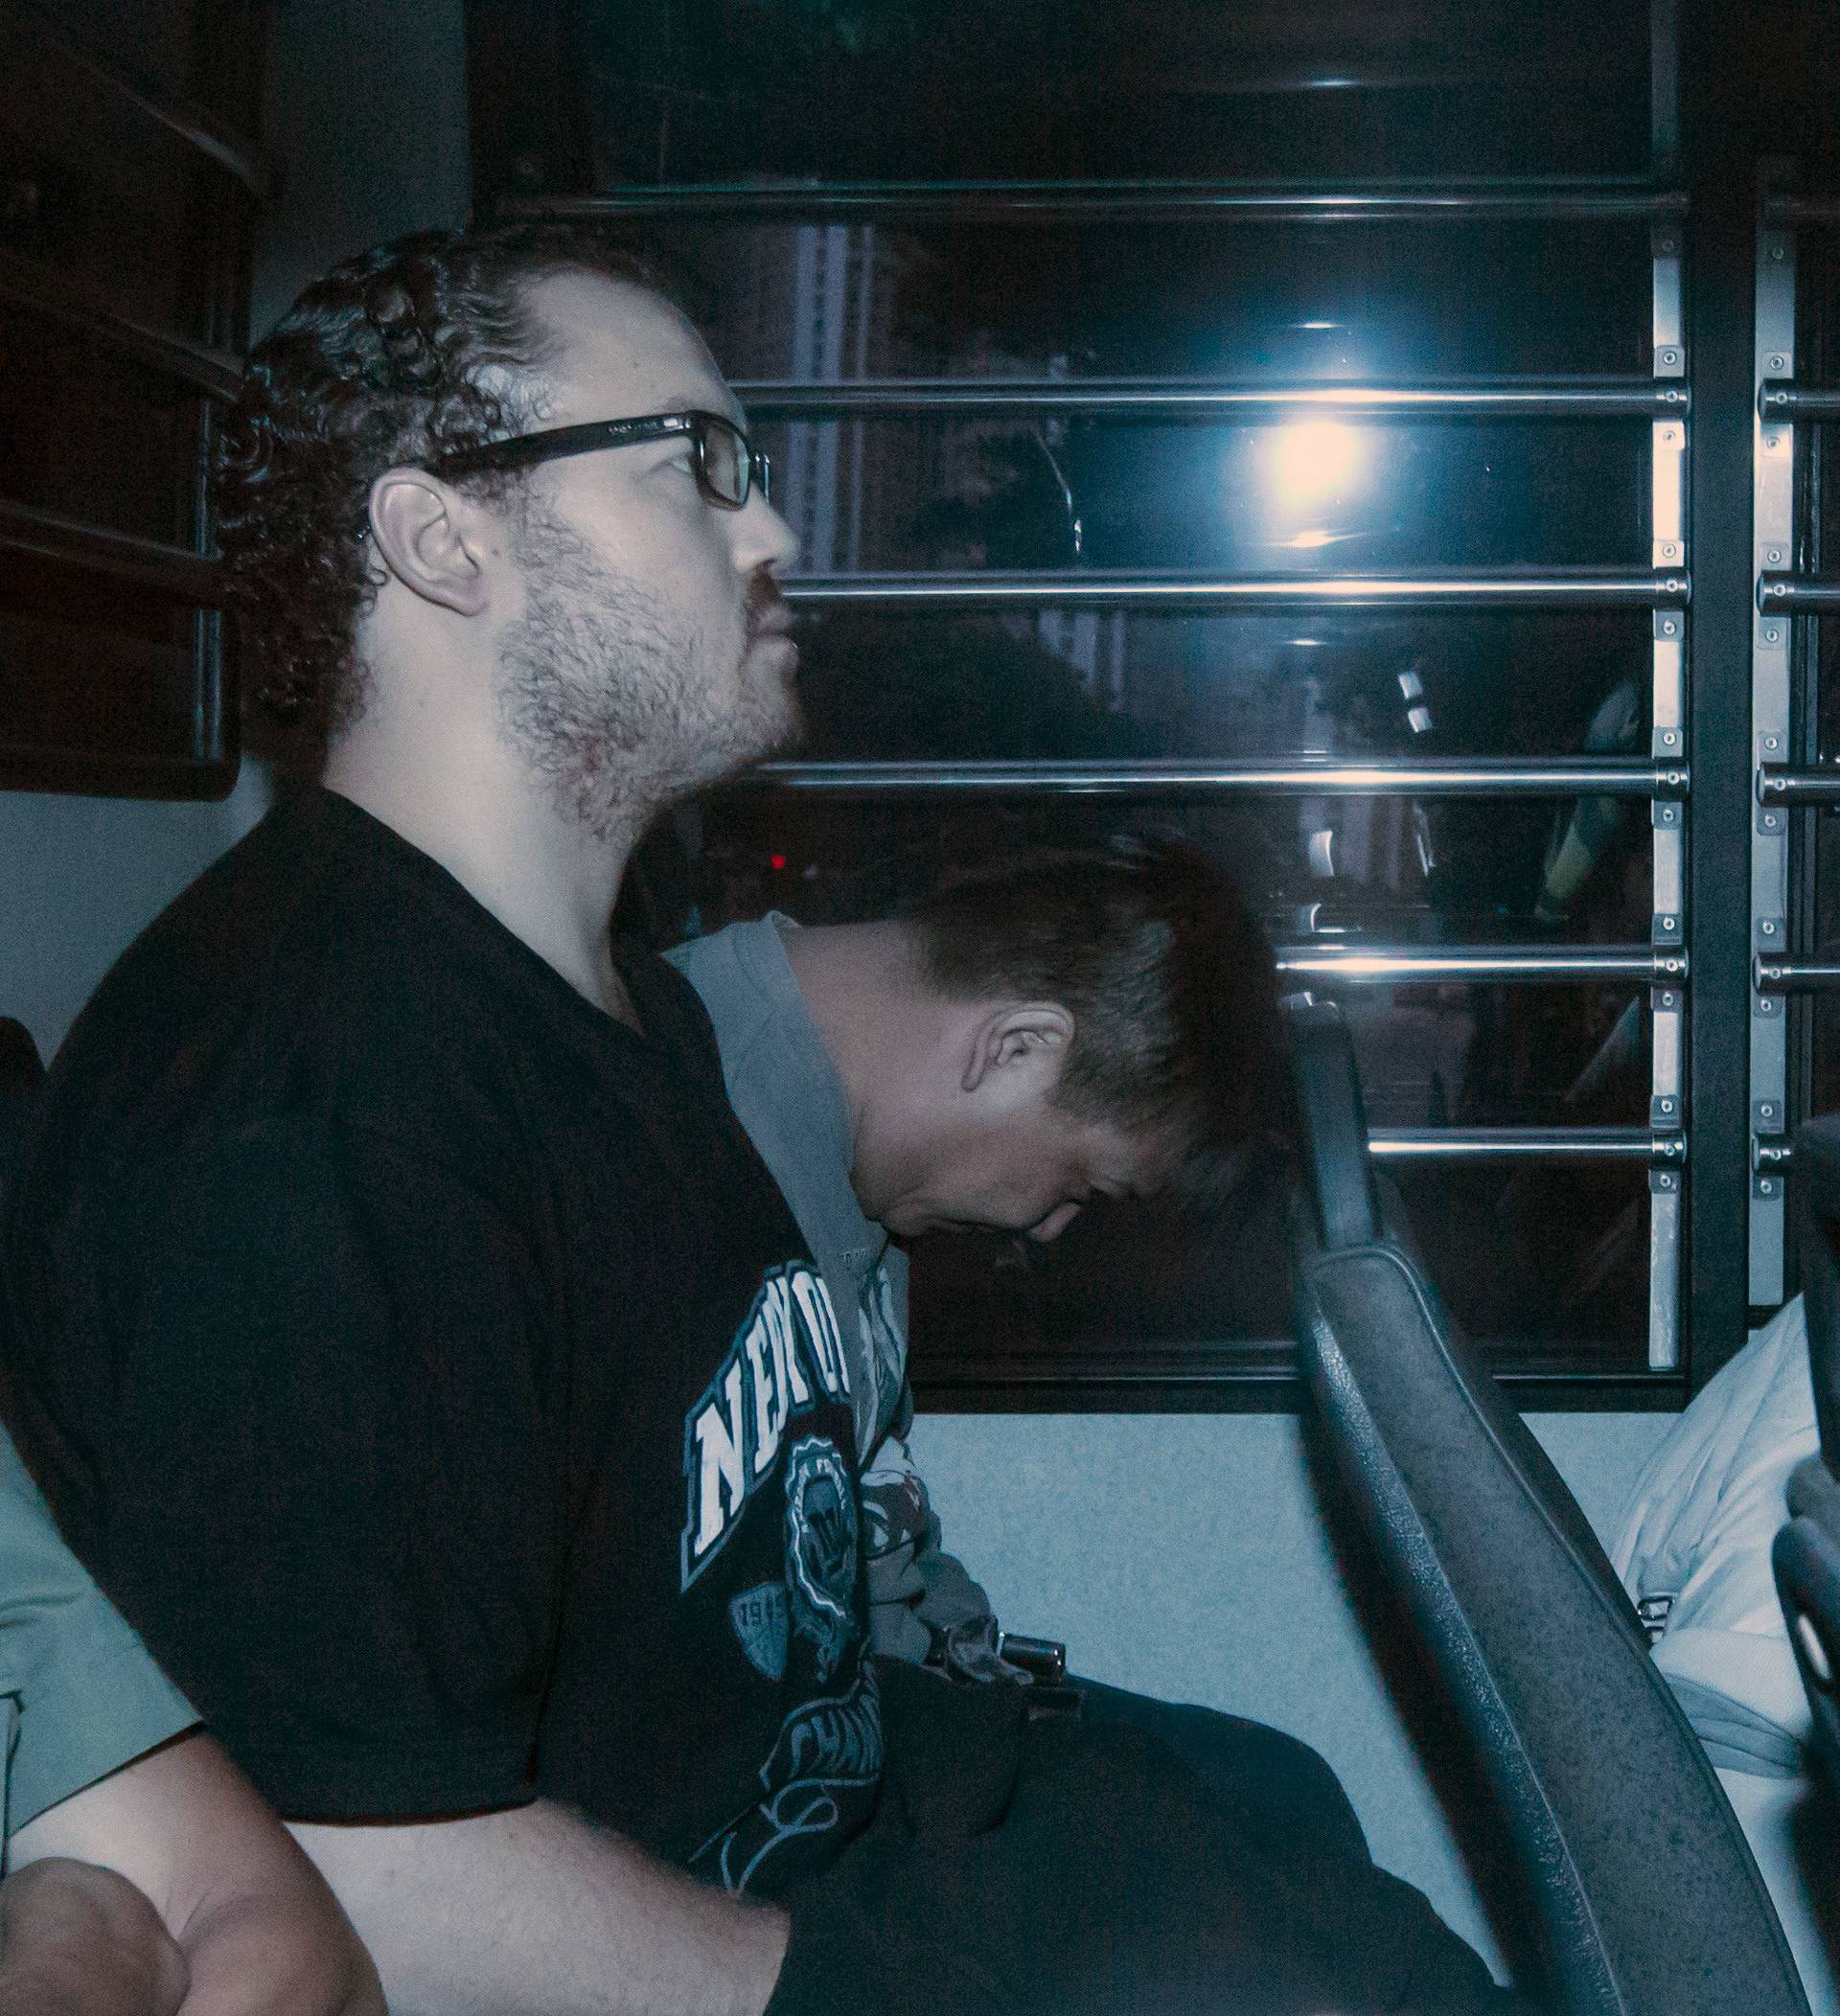 Rurik George Caton Jutting, a British banker charged with two counts of murder after police found the bodies of two women in his apartment, sits in the back row of a prison bus as he arrives at the Eastern Law Courts in Hong Kong, China